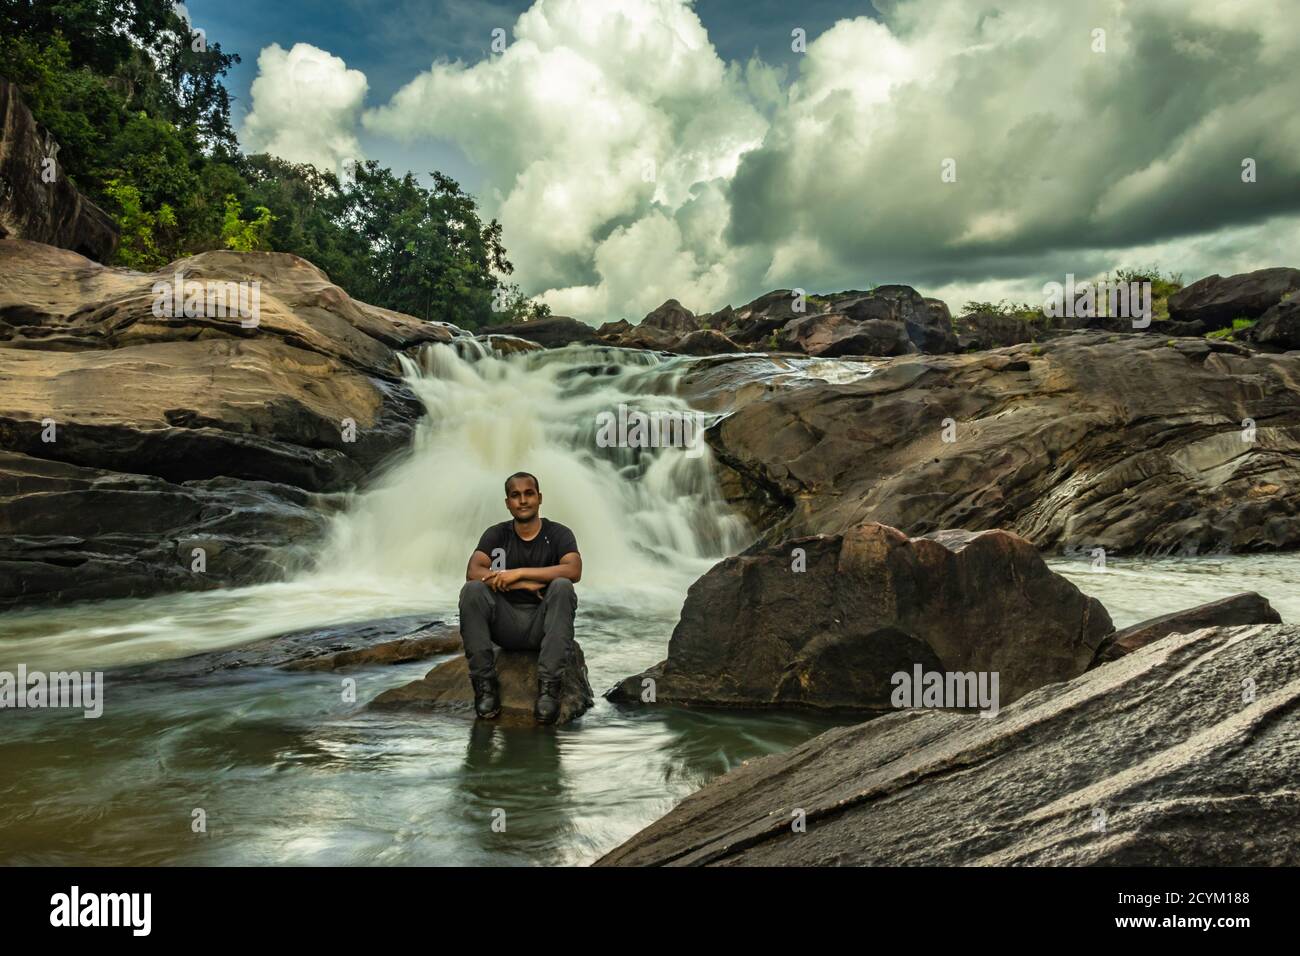 man sitting at rock watching the beautiful waterfall stream at evening image is taken at remote western ghat forests karnataka india. it is showing th Stock Photo